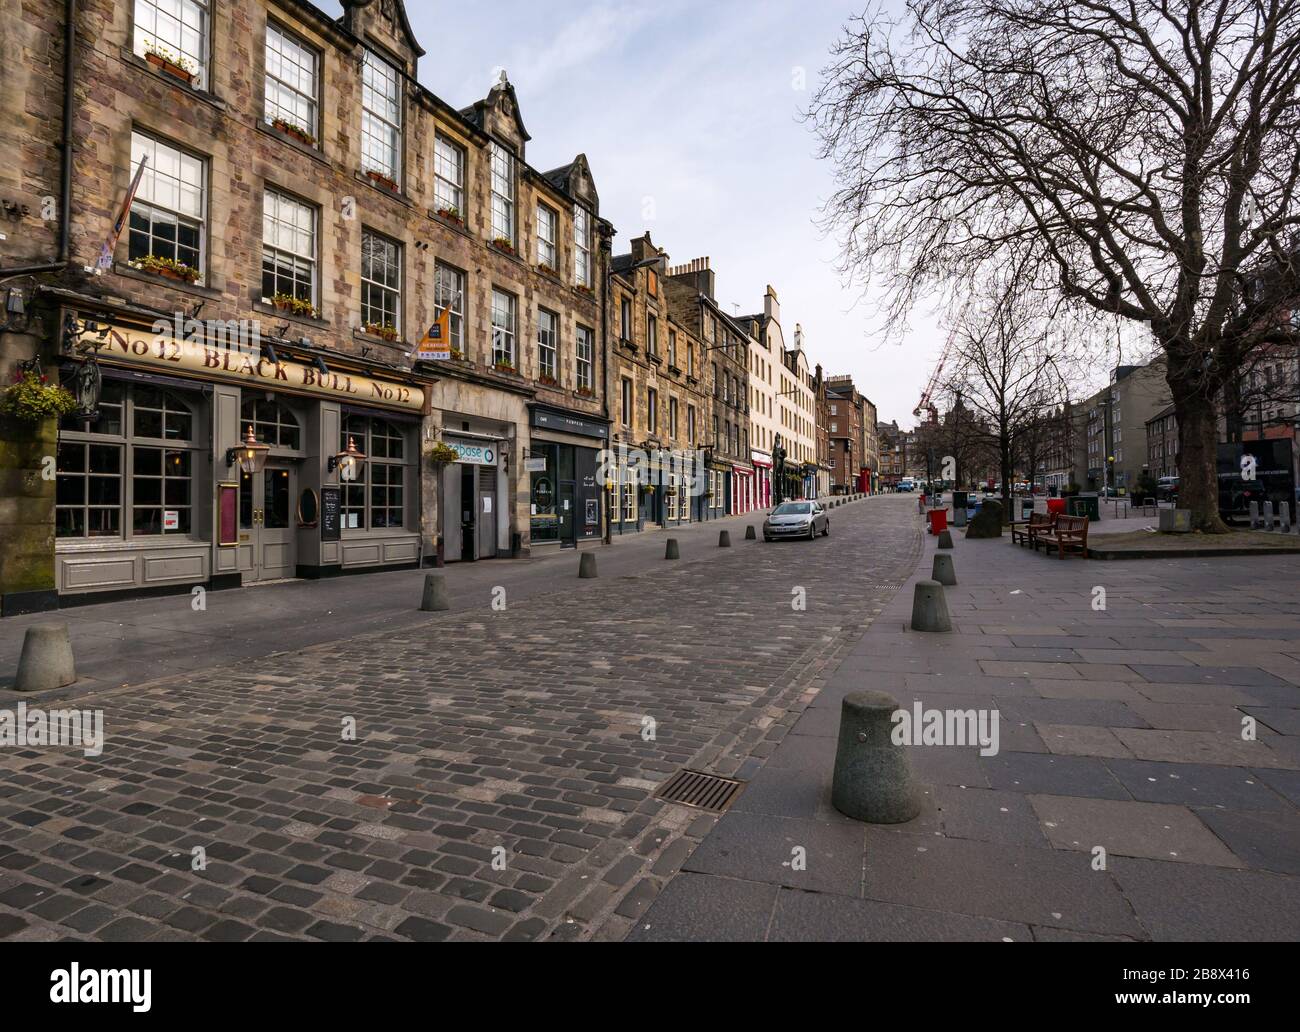 Edinburgh, Scotland, United Kingdom. 23rd March, 2020. Empty streets during the Covid-19 Coronavirus pandemic in the capital city as the message to stay at home heed the social distancing measures appears to have had an effect despite the lovely Spring sunshine. The Grassmarket is completed deserted with all the restaurants and bars closed Stock Photo